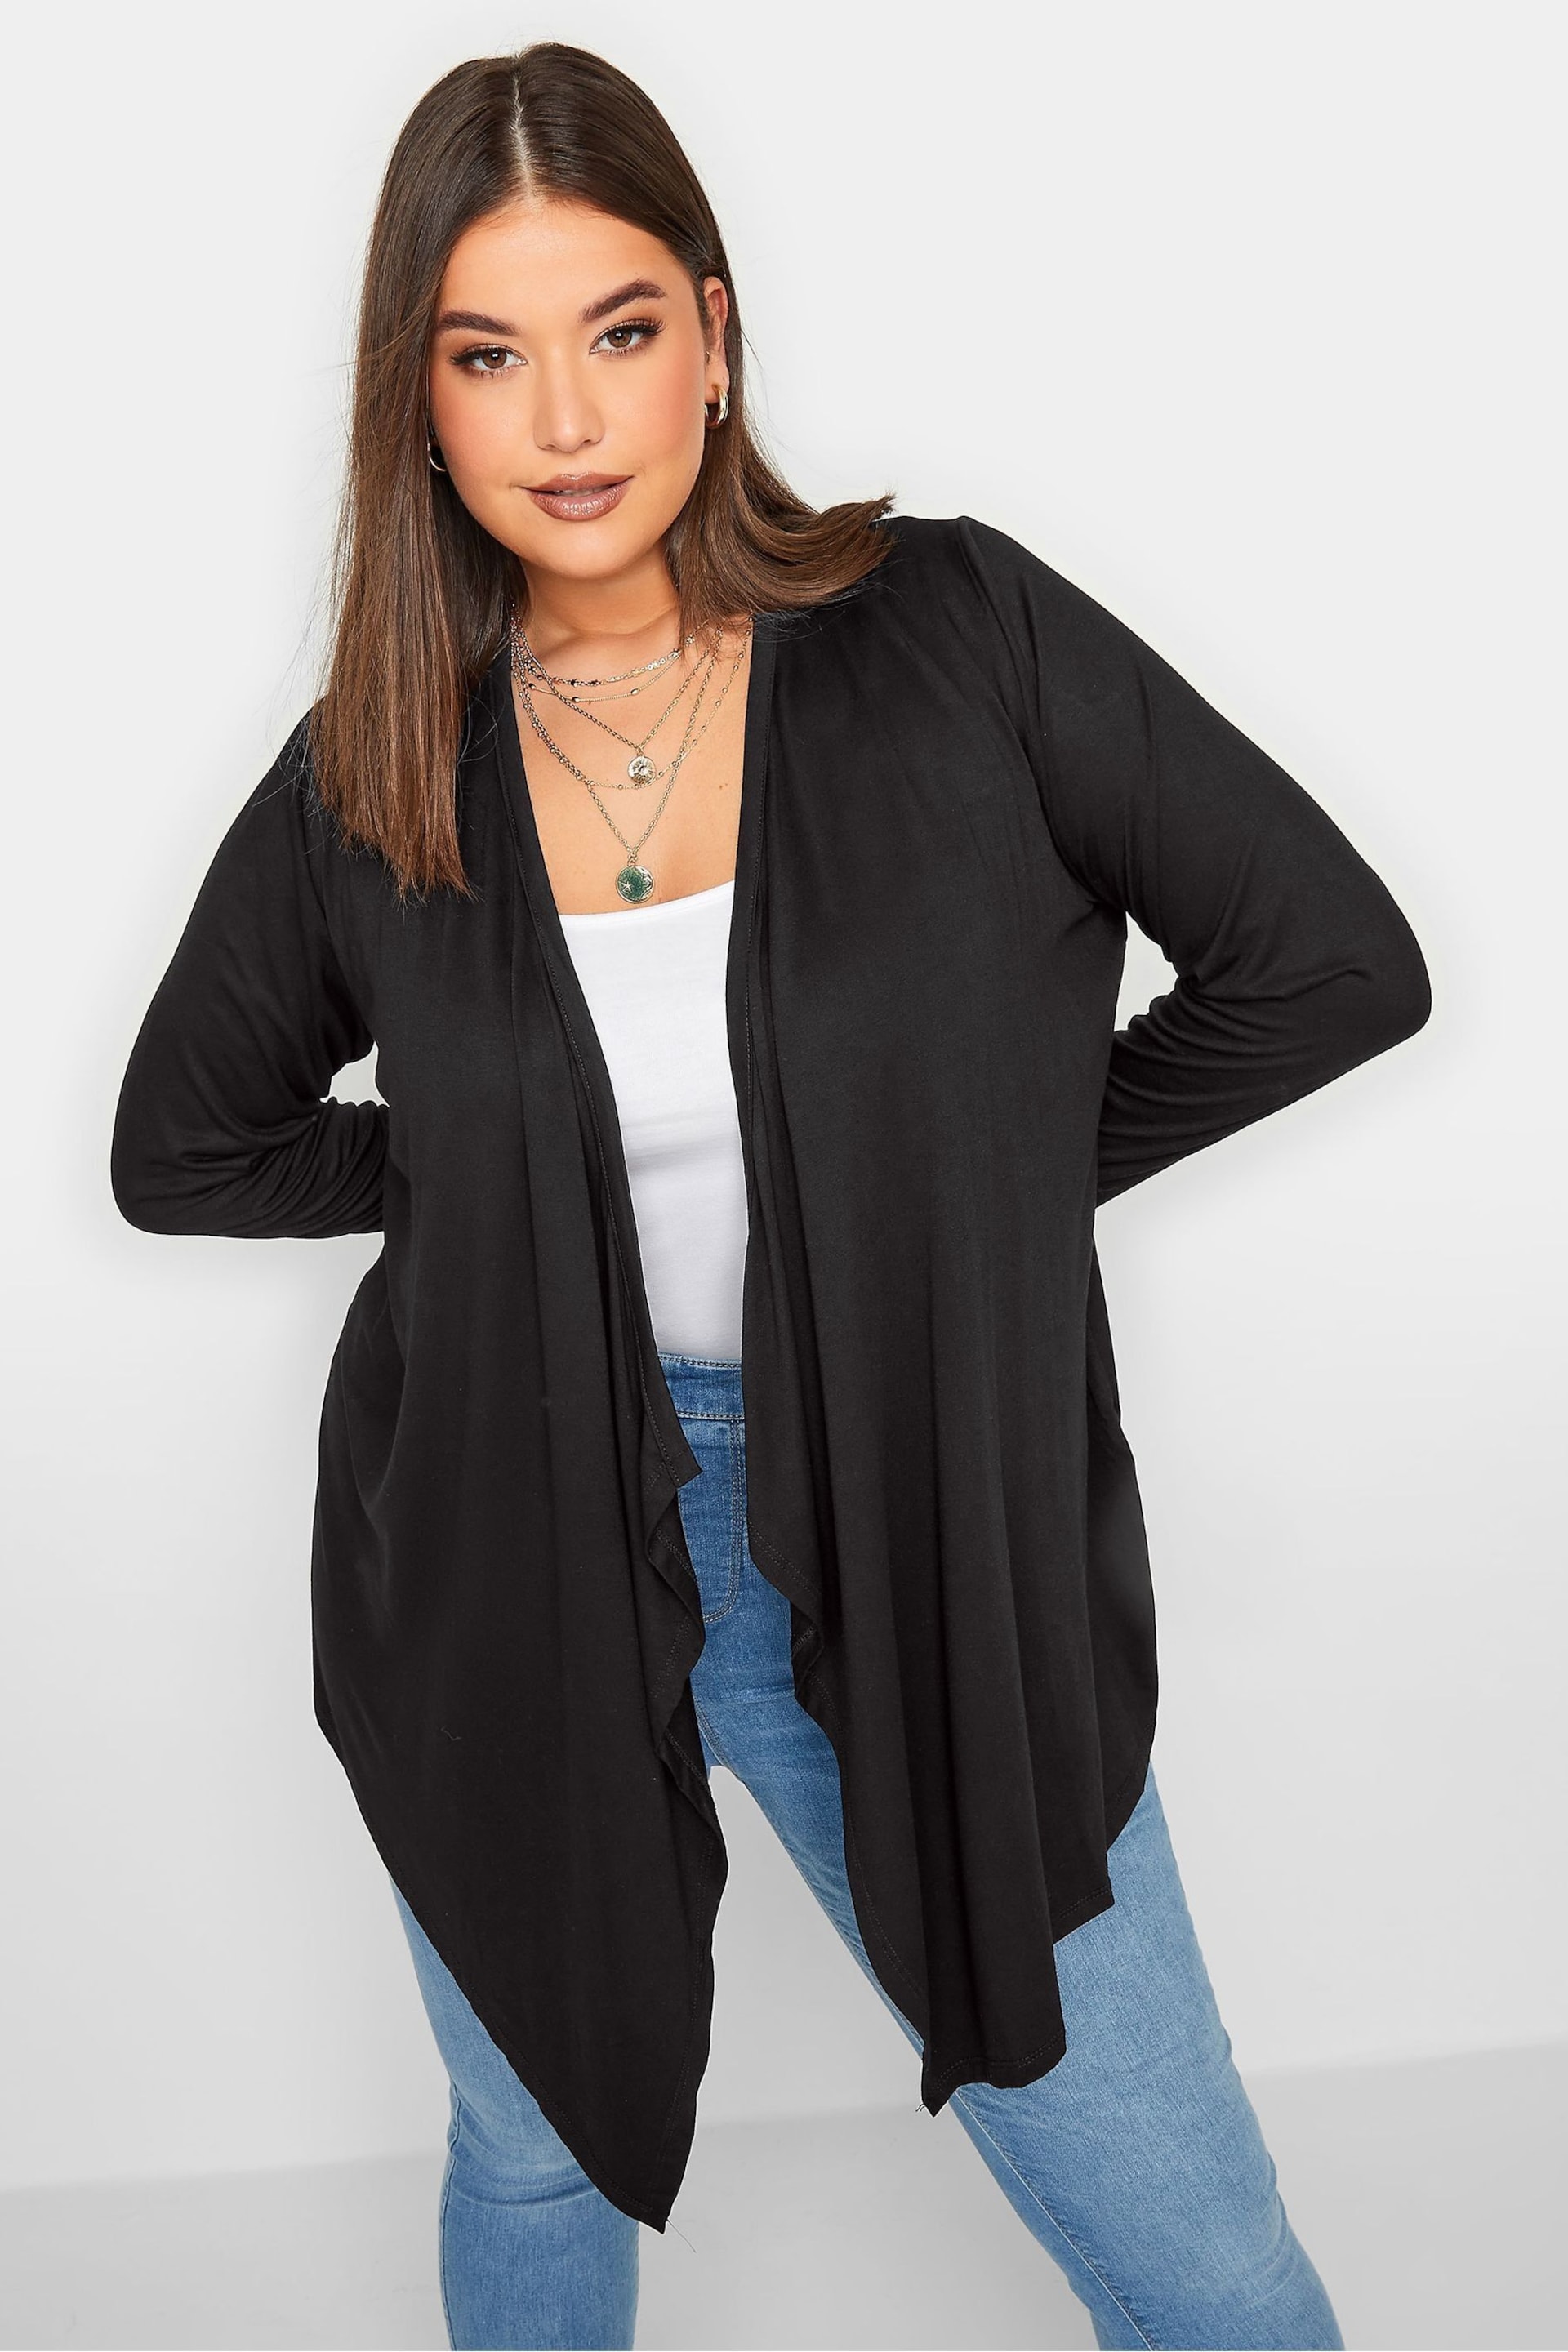 Yours Curve Black Waterfall Cardigan - Image 1 of 8